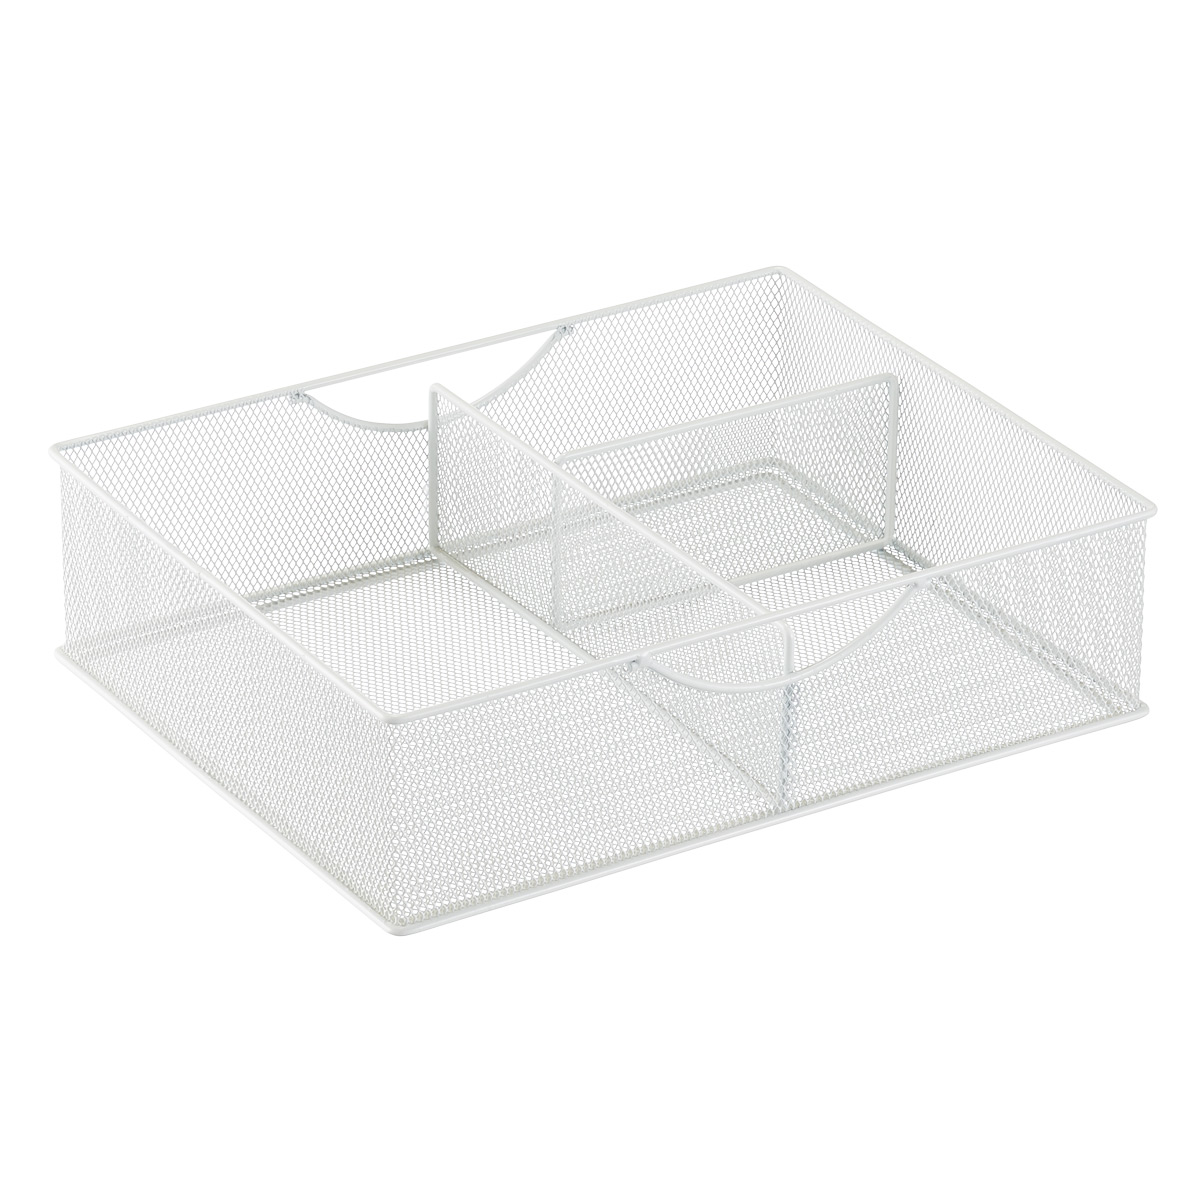 3-Section Mesh Food Storage Organizer | The Container Store